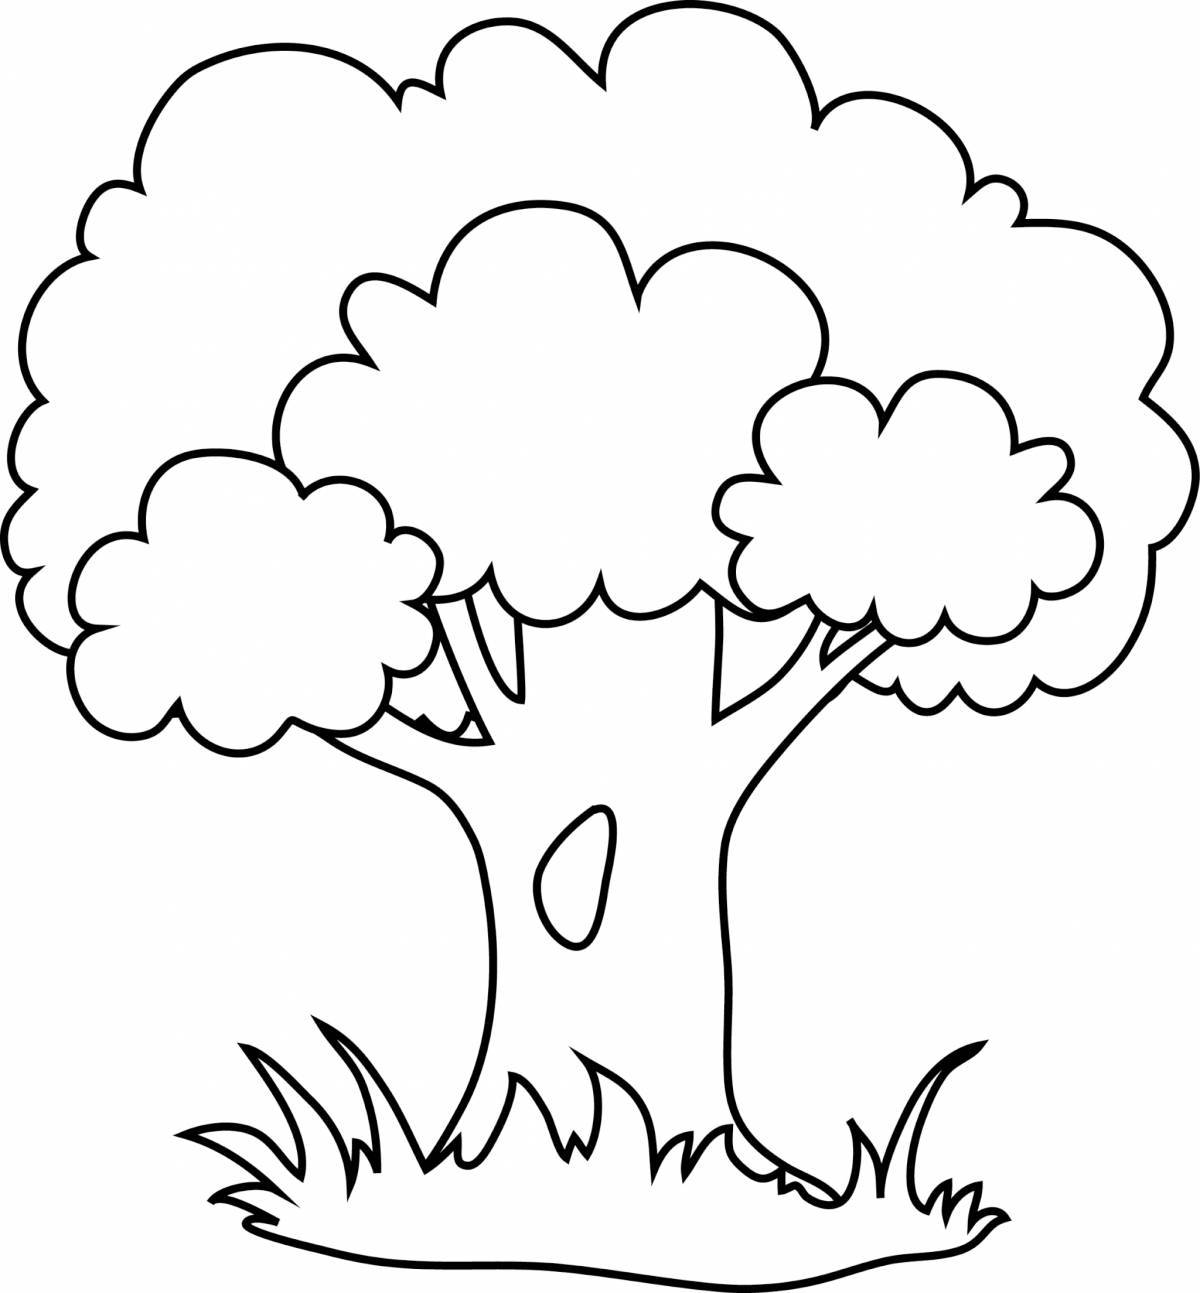 Glitzy tree coloring page for kids